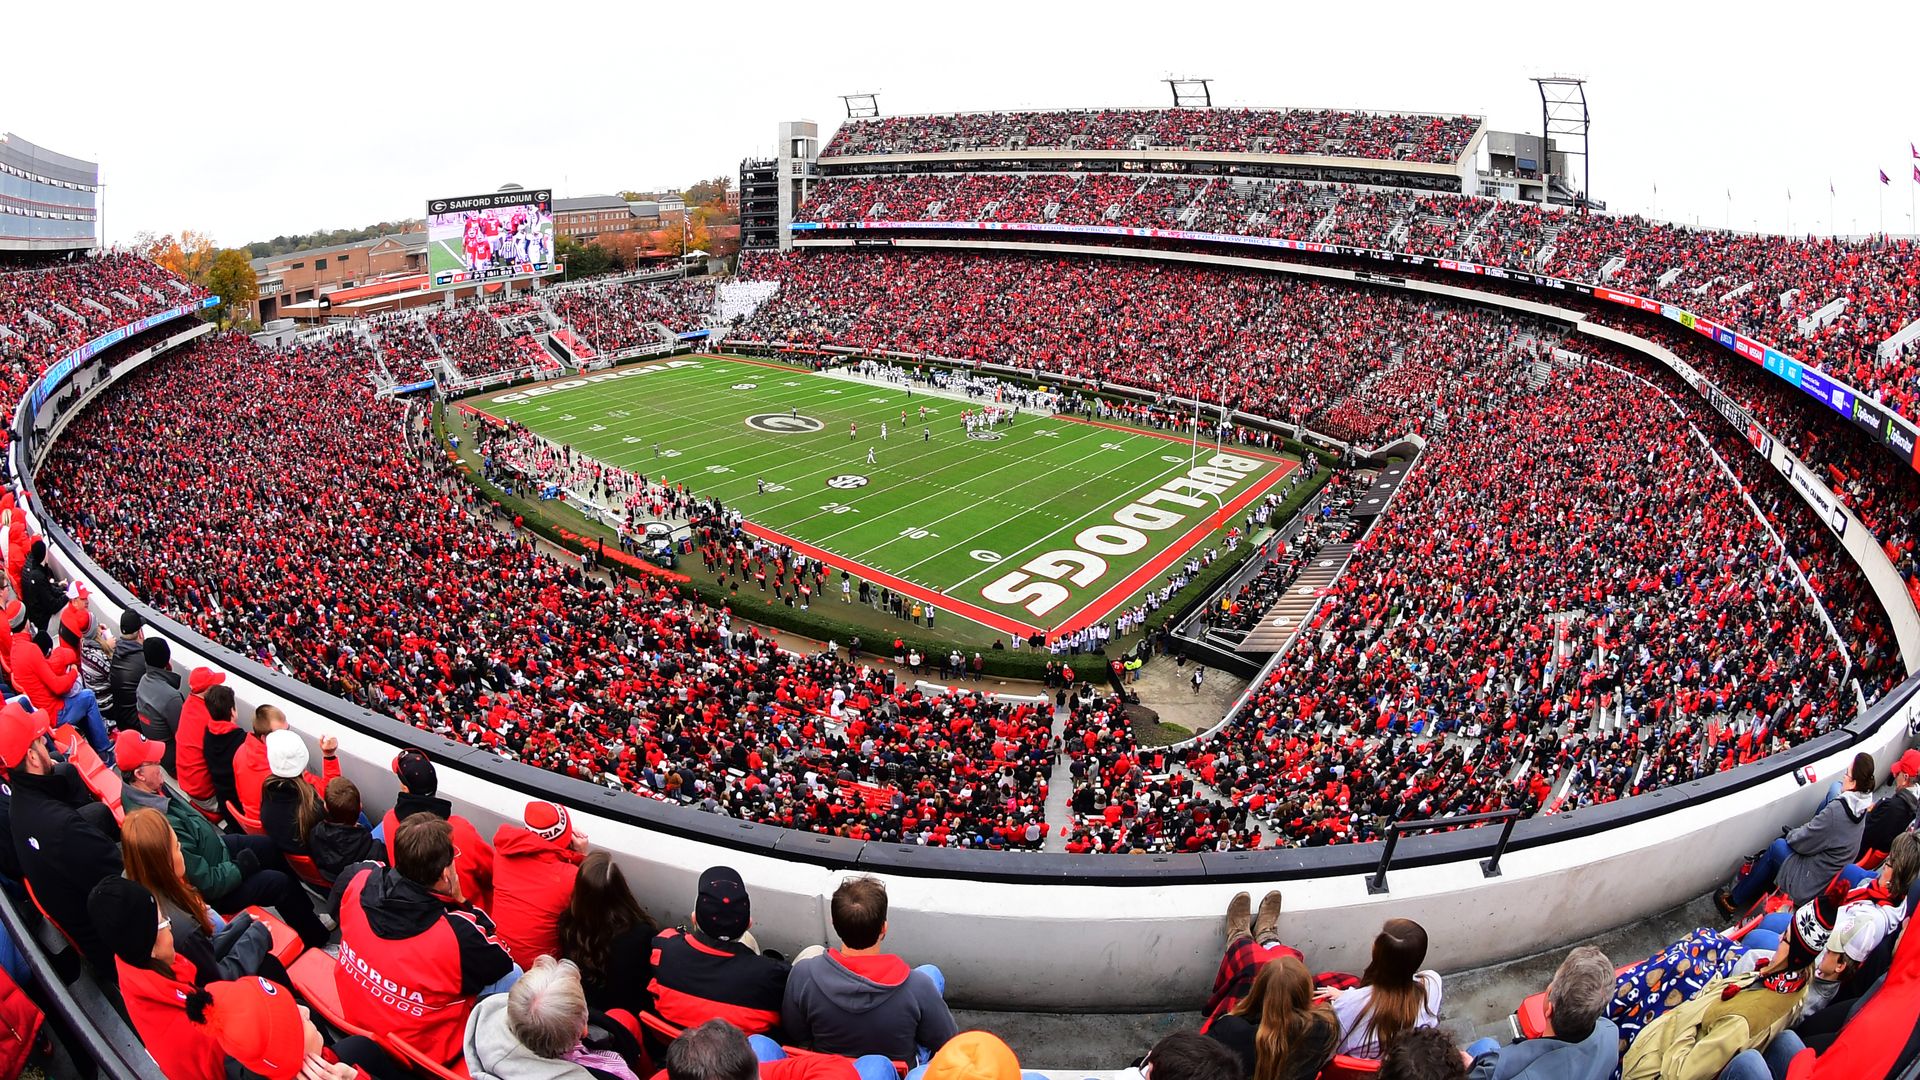 A wide-angle photo of UGA's Sanford Stadium packed with Bulldogs fans wearing red and black on gameday